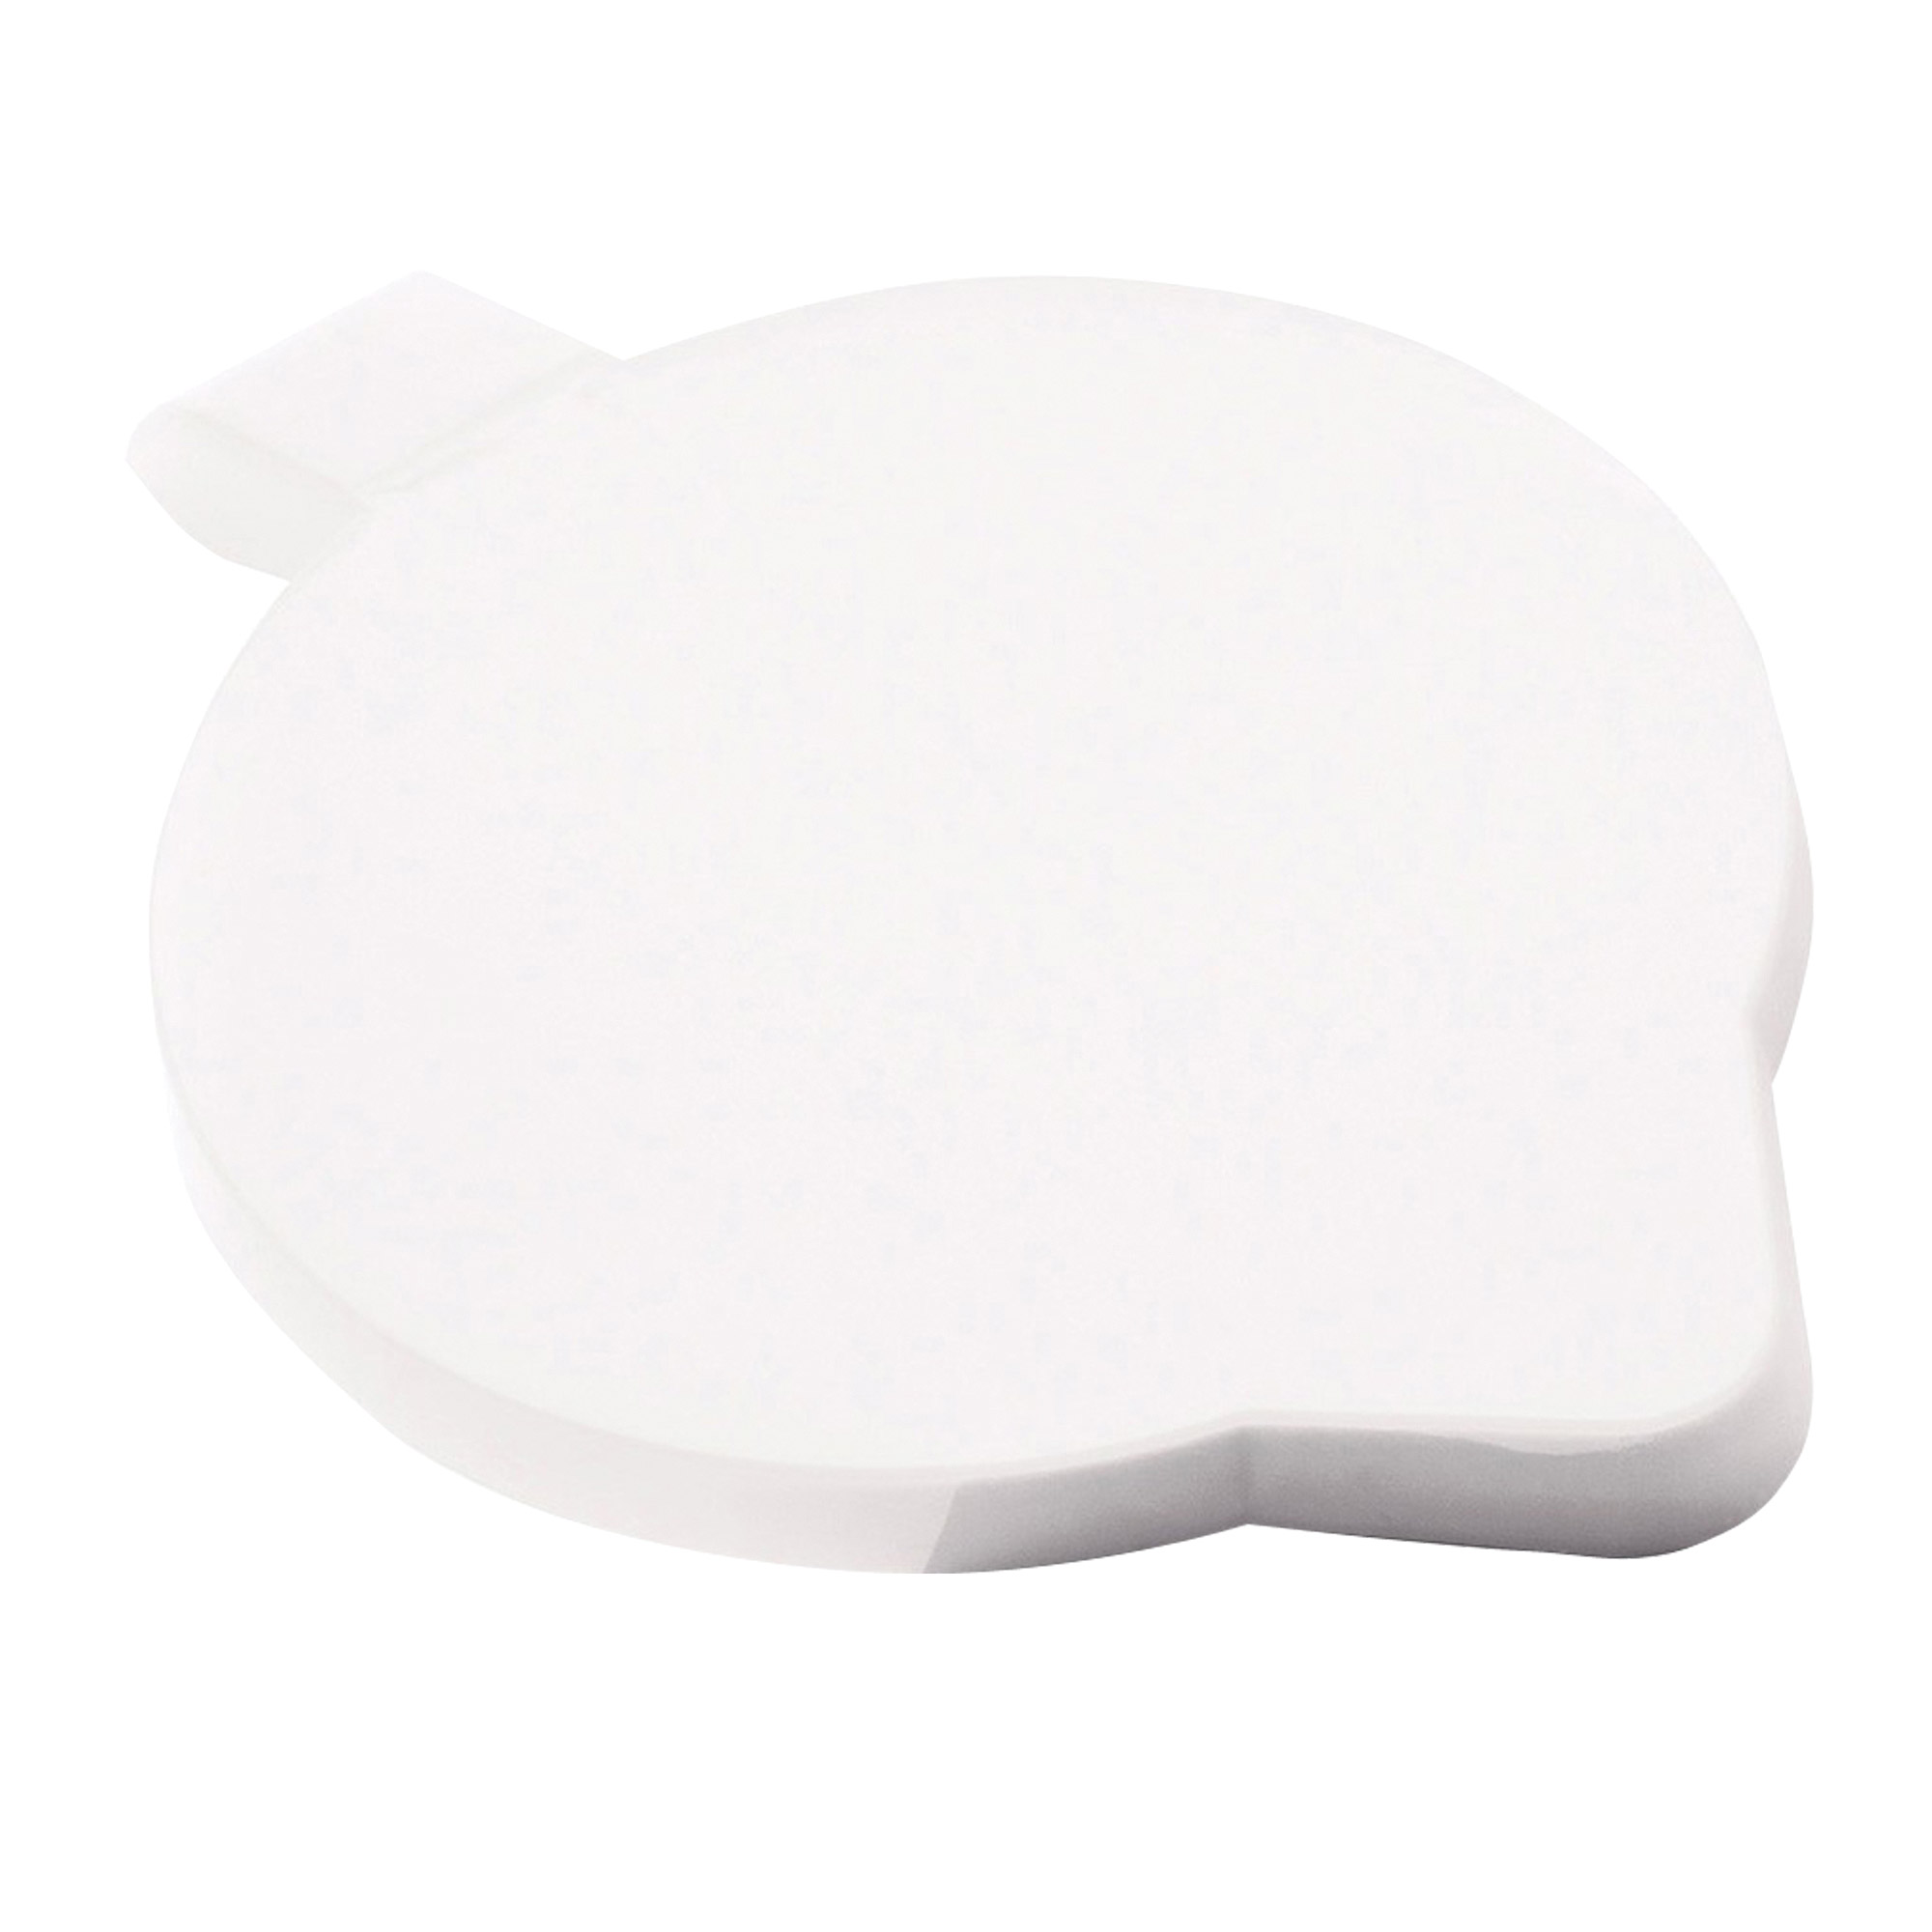 Polycarbonate Lid Only ( White ) for CB-8106 & CB-8065 - Each